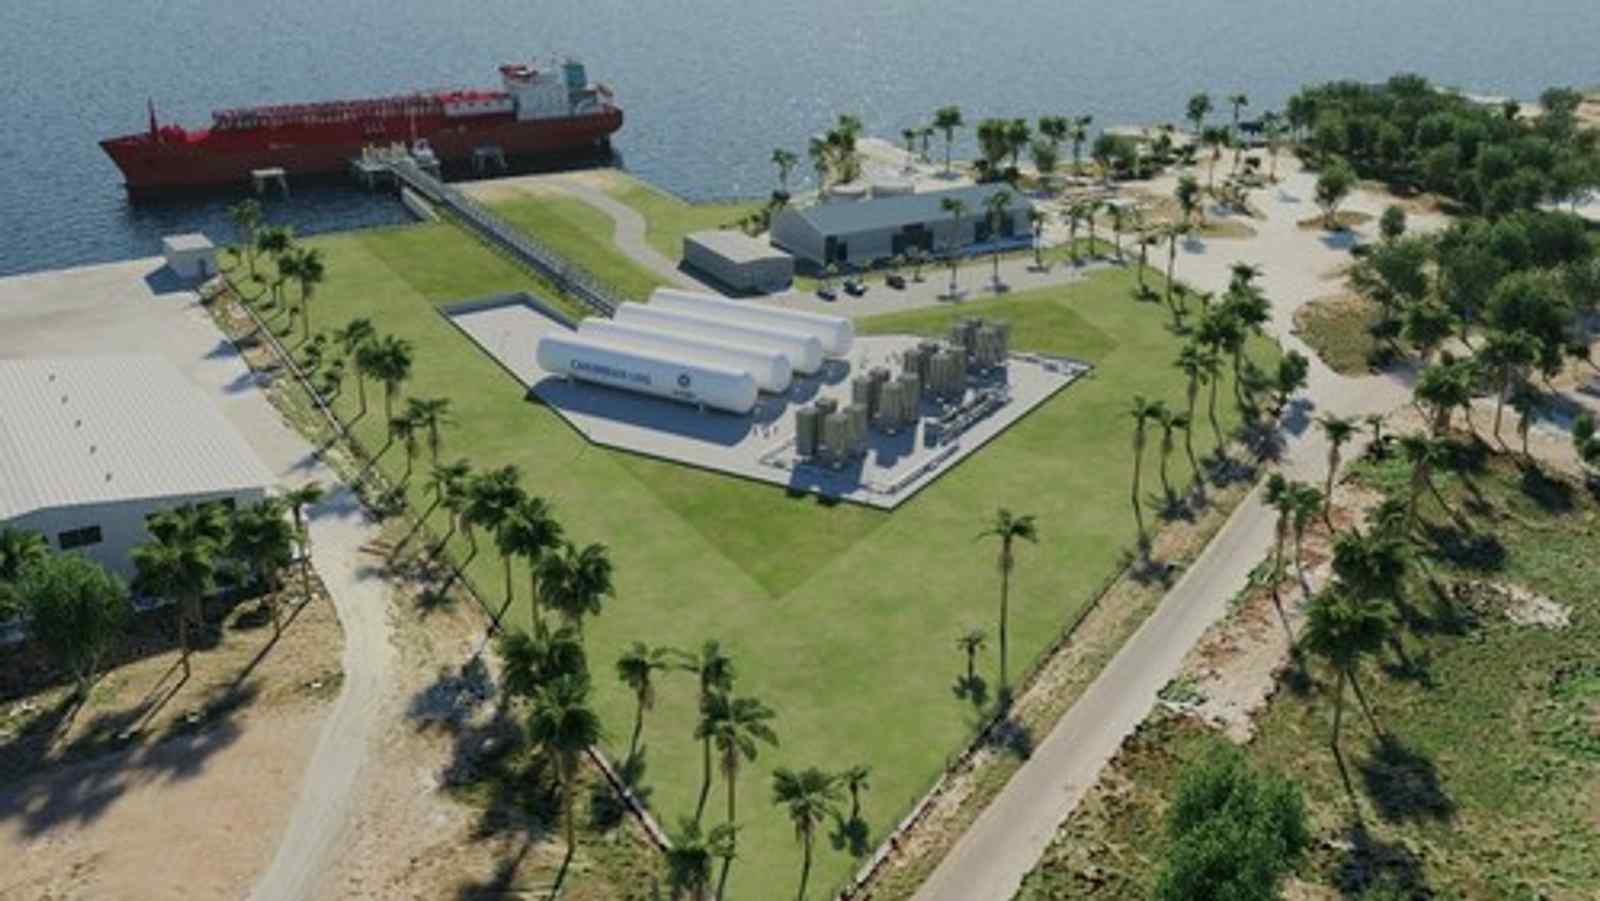 INOXCVA awarded contract to set up Mini LNG Terminal for Caribbean LNG in Antigua